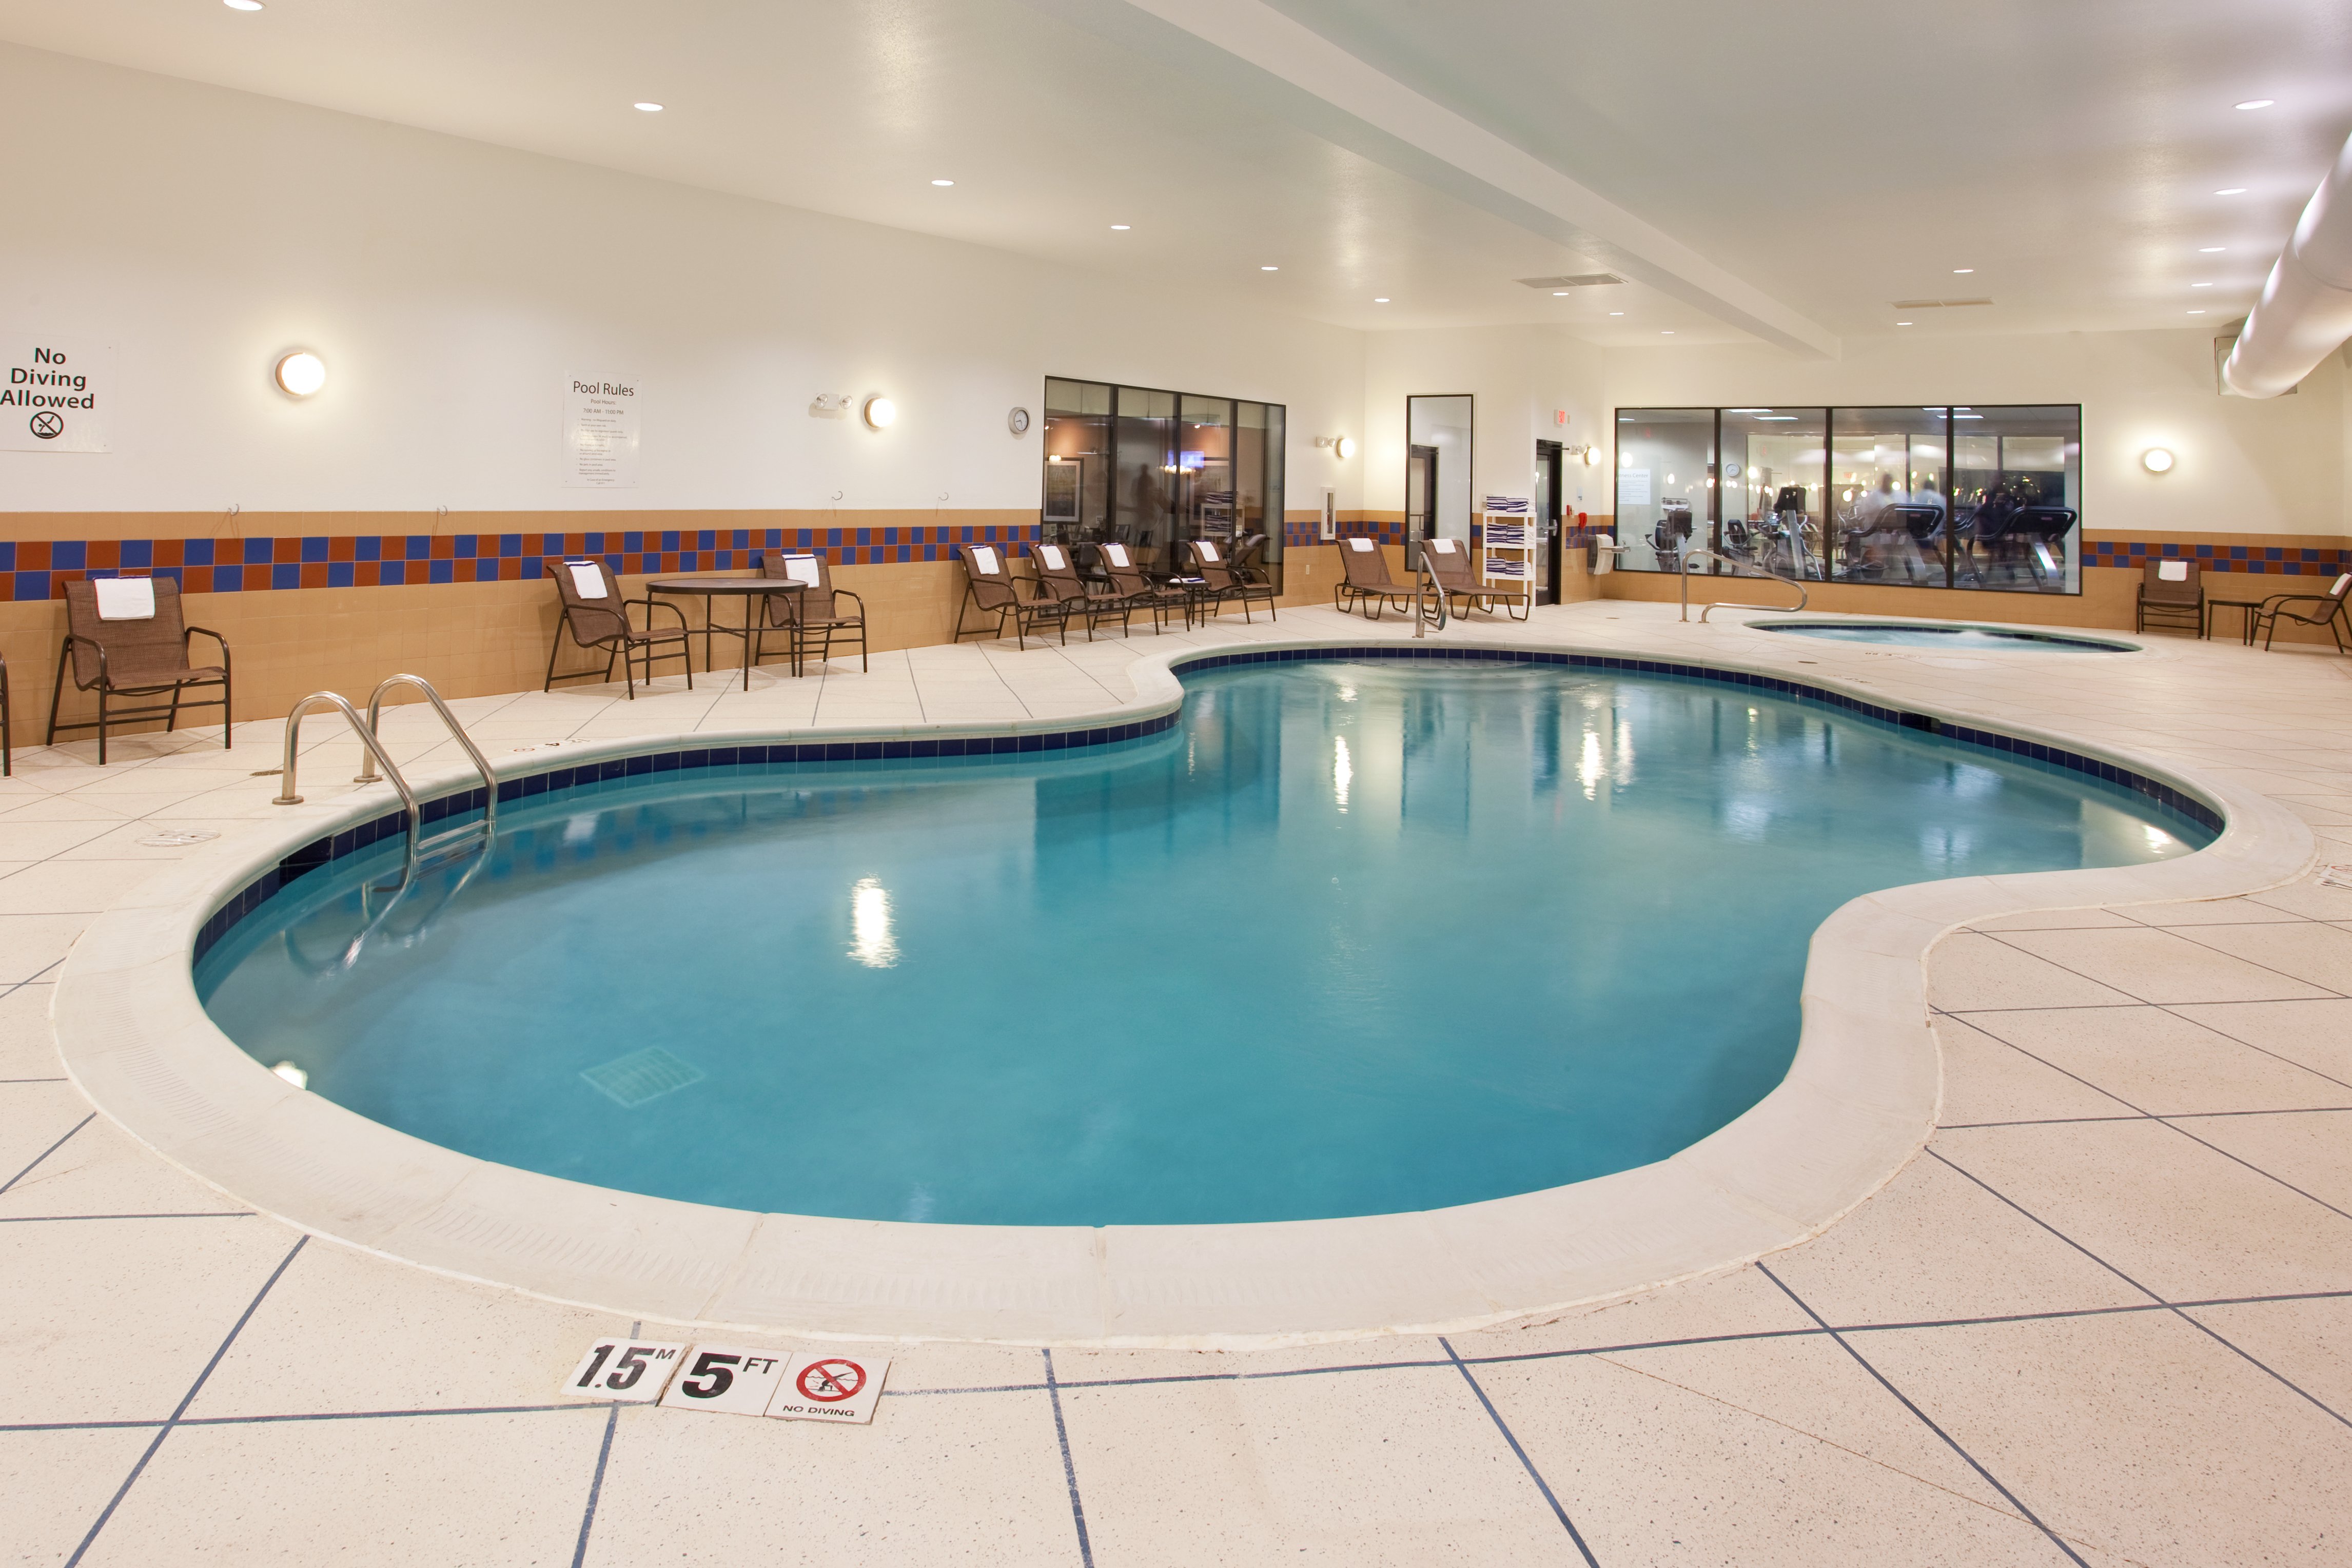 Have a morning or afternoon dip in our heated indoor pool.